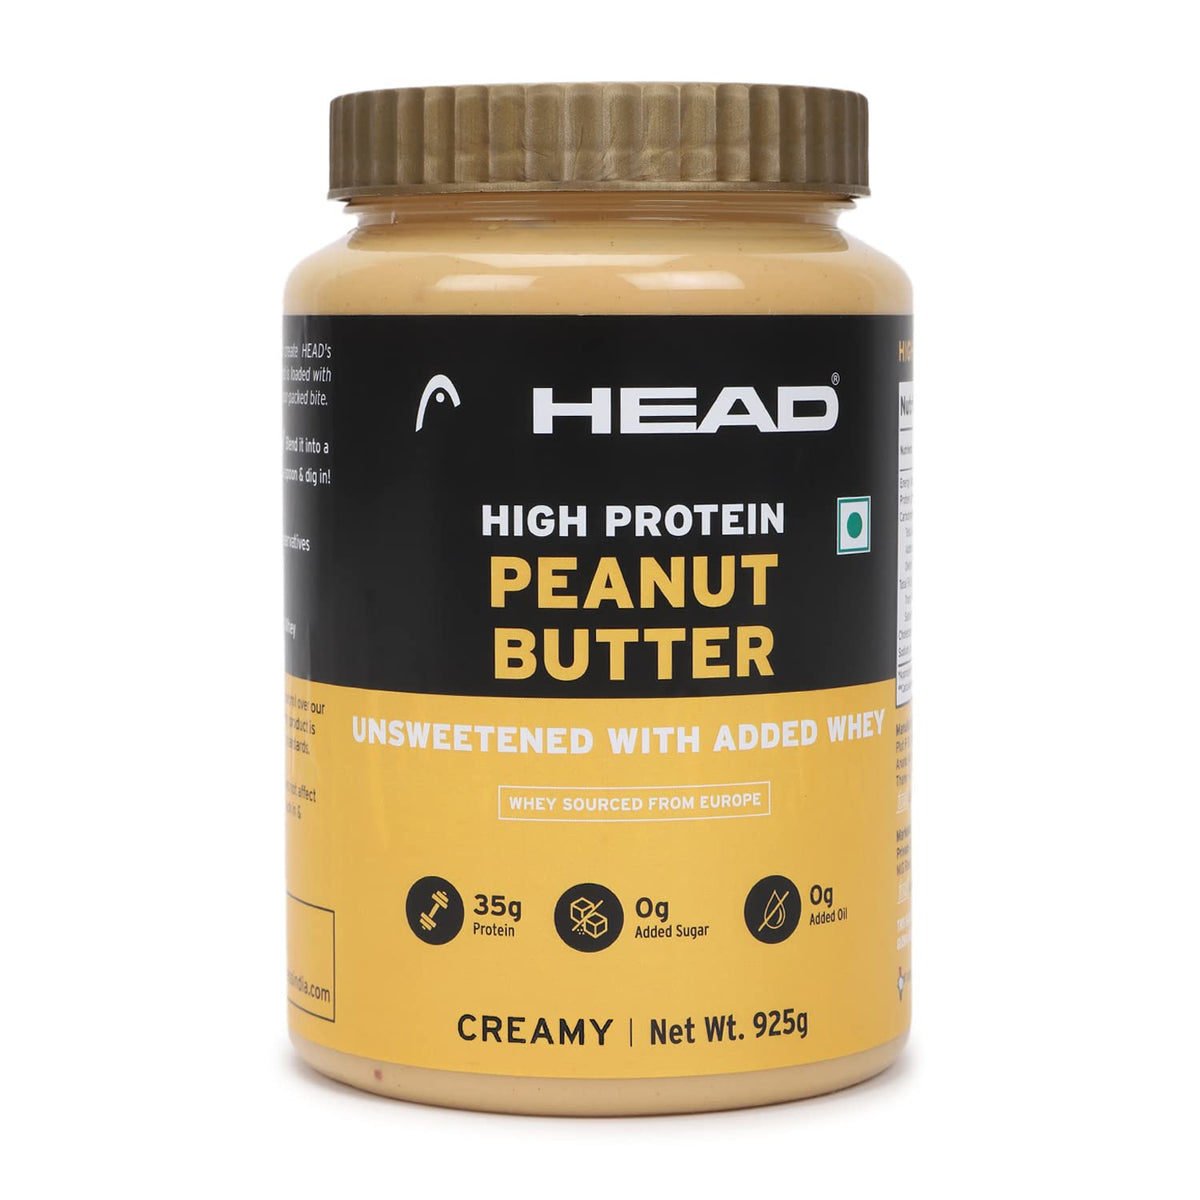 Head High Protein Peanut Butter (925g, Unsweetened, Creamy) | 100% Pure Nuts | Added Whey | Protein Rich Nutritious Snack